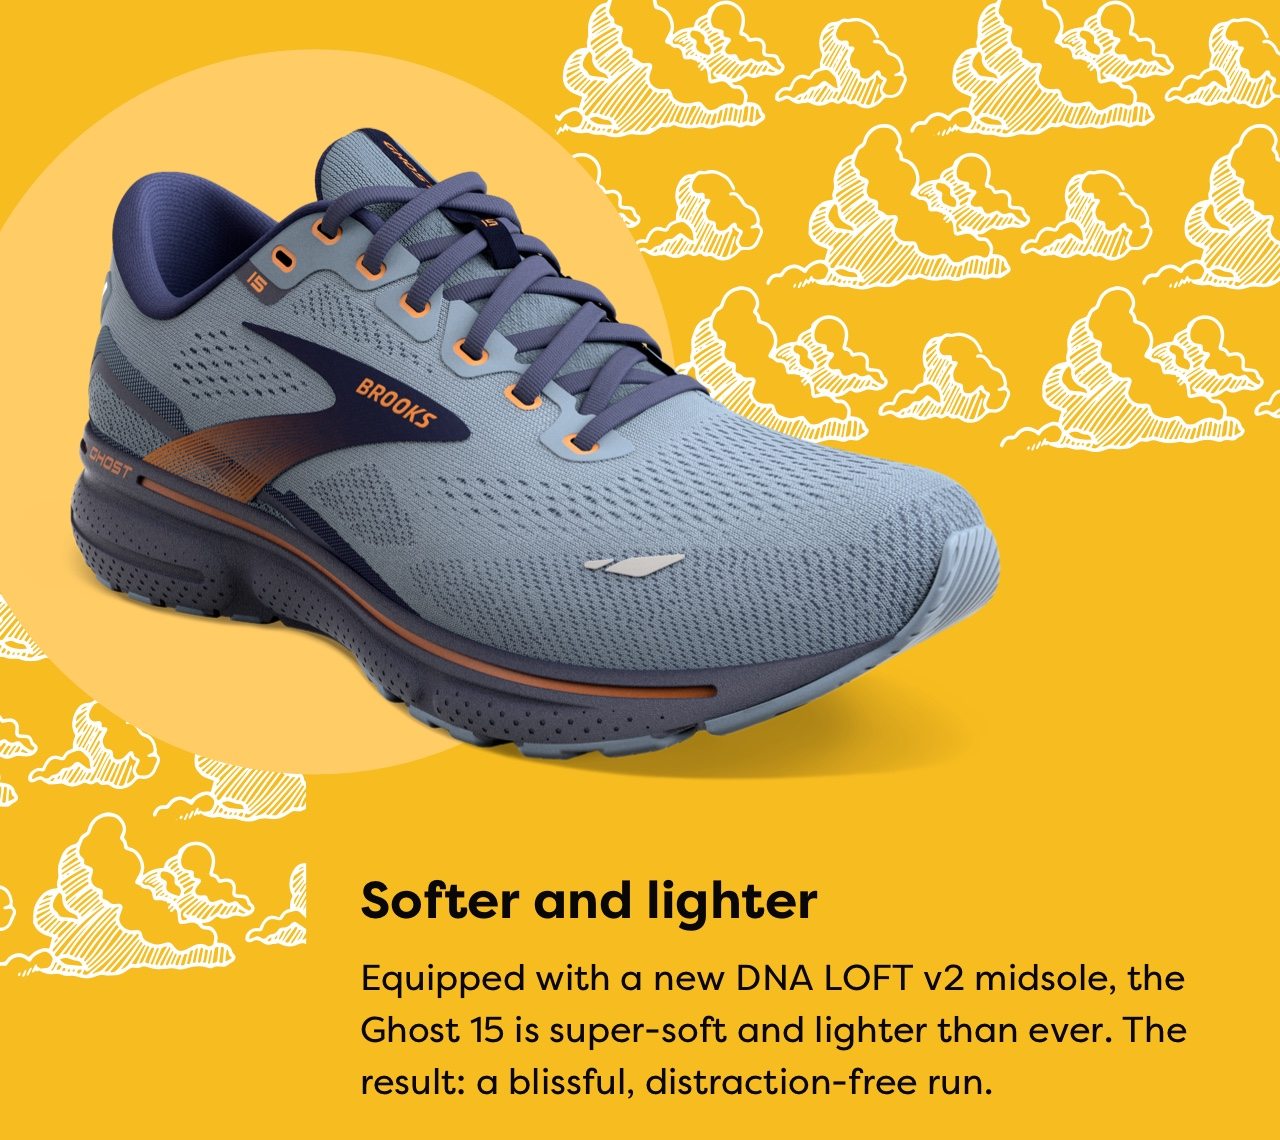 Softer and lighter | Equipped with a new DNA LOFT v2 midsole, the Ghost 15 is super-soft and lighter than ever. The result; a blissful, distraction-free run.